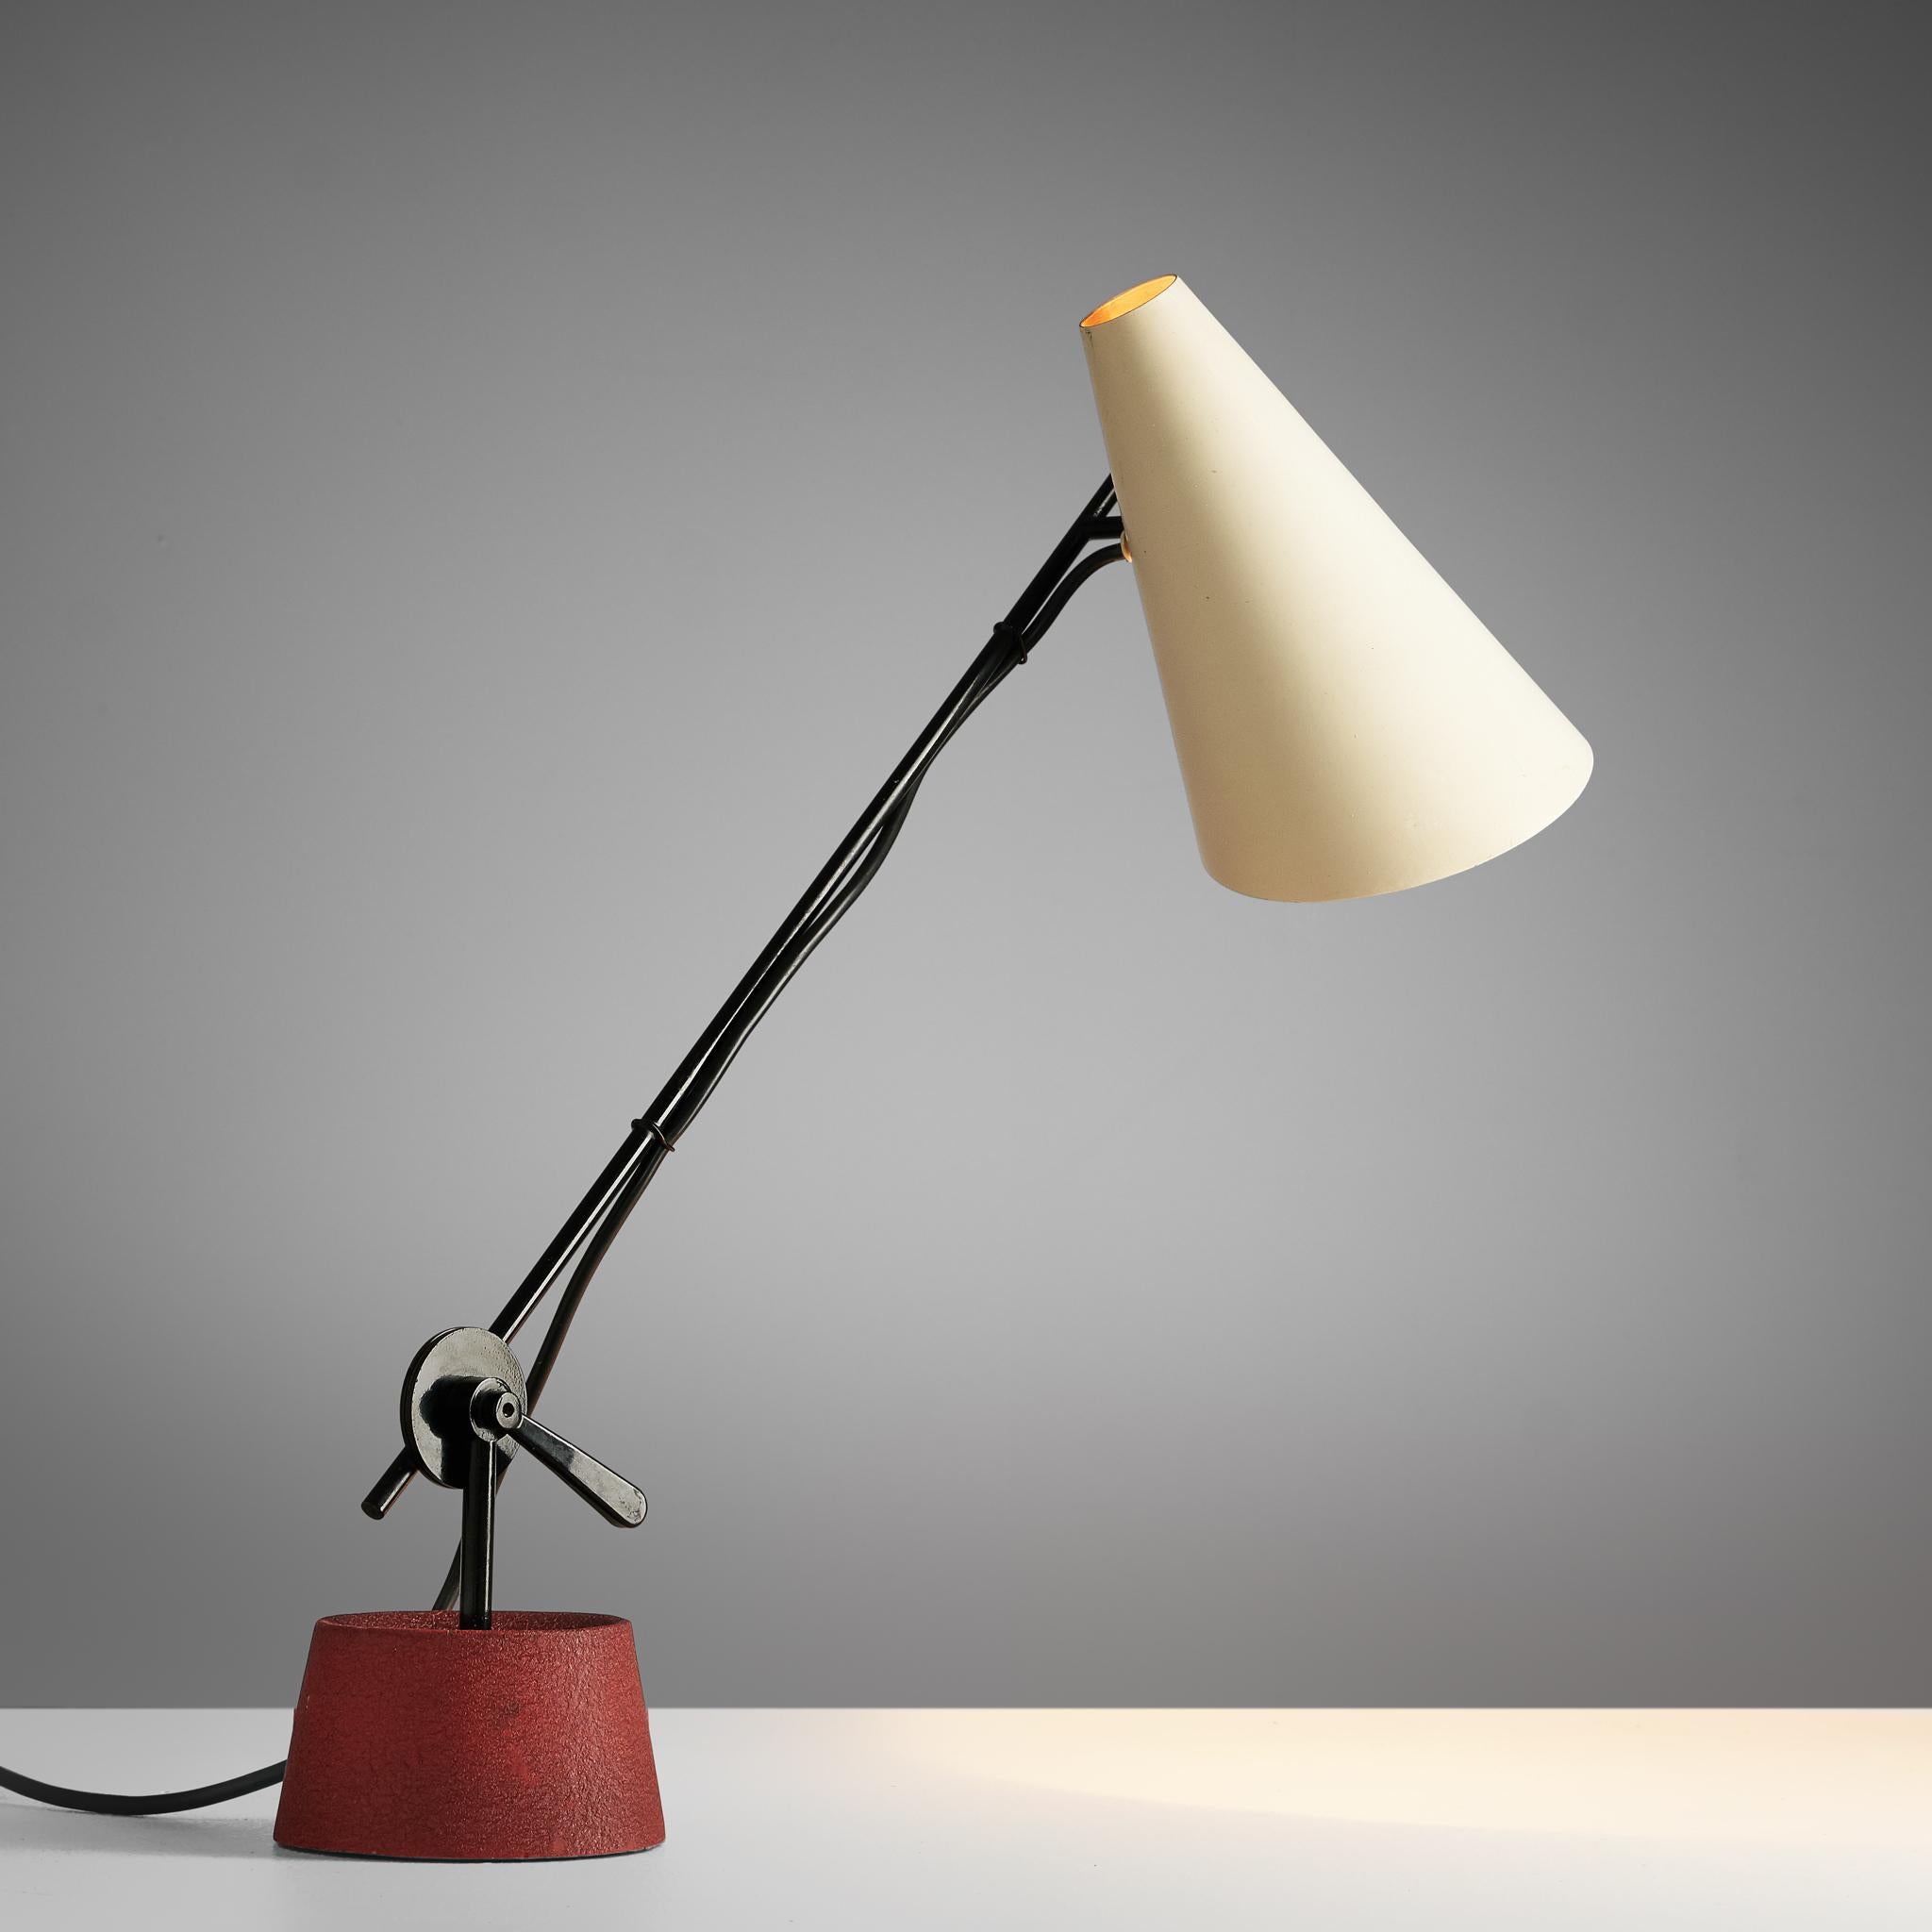 Bünte & Remmler, table light, metal, Austria, 1950s.

This rare desk lamp was produced by Bünte & Remmler. It is made from metal and had an adjustable head.